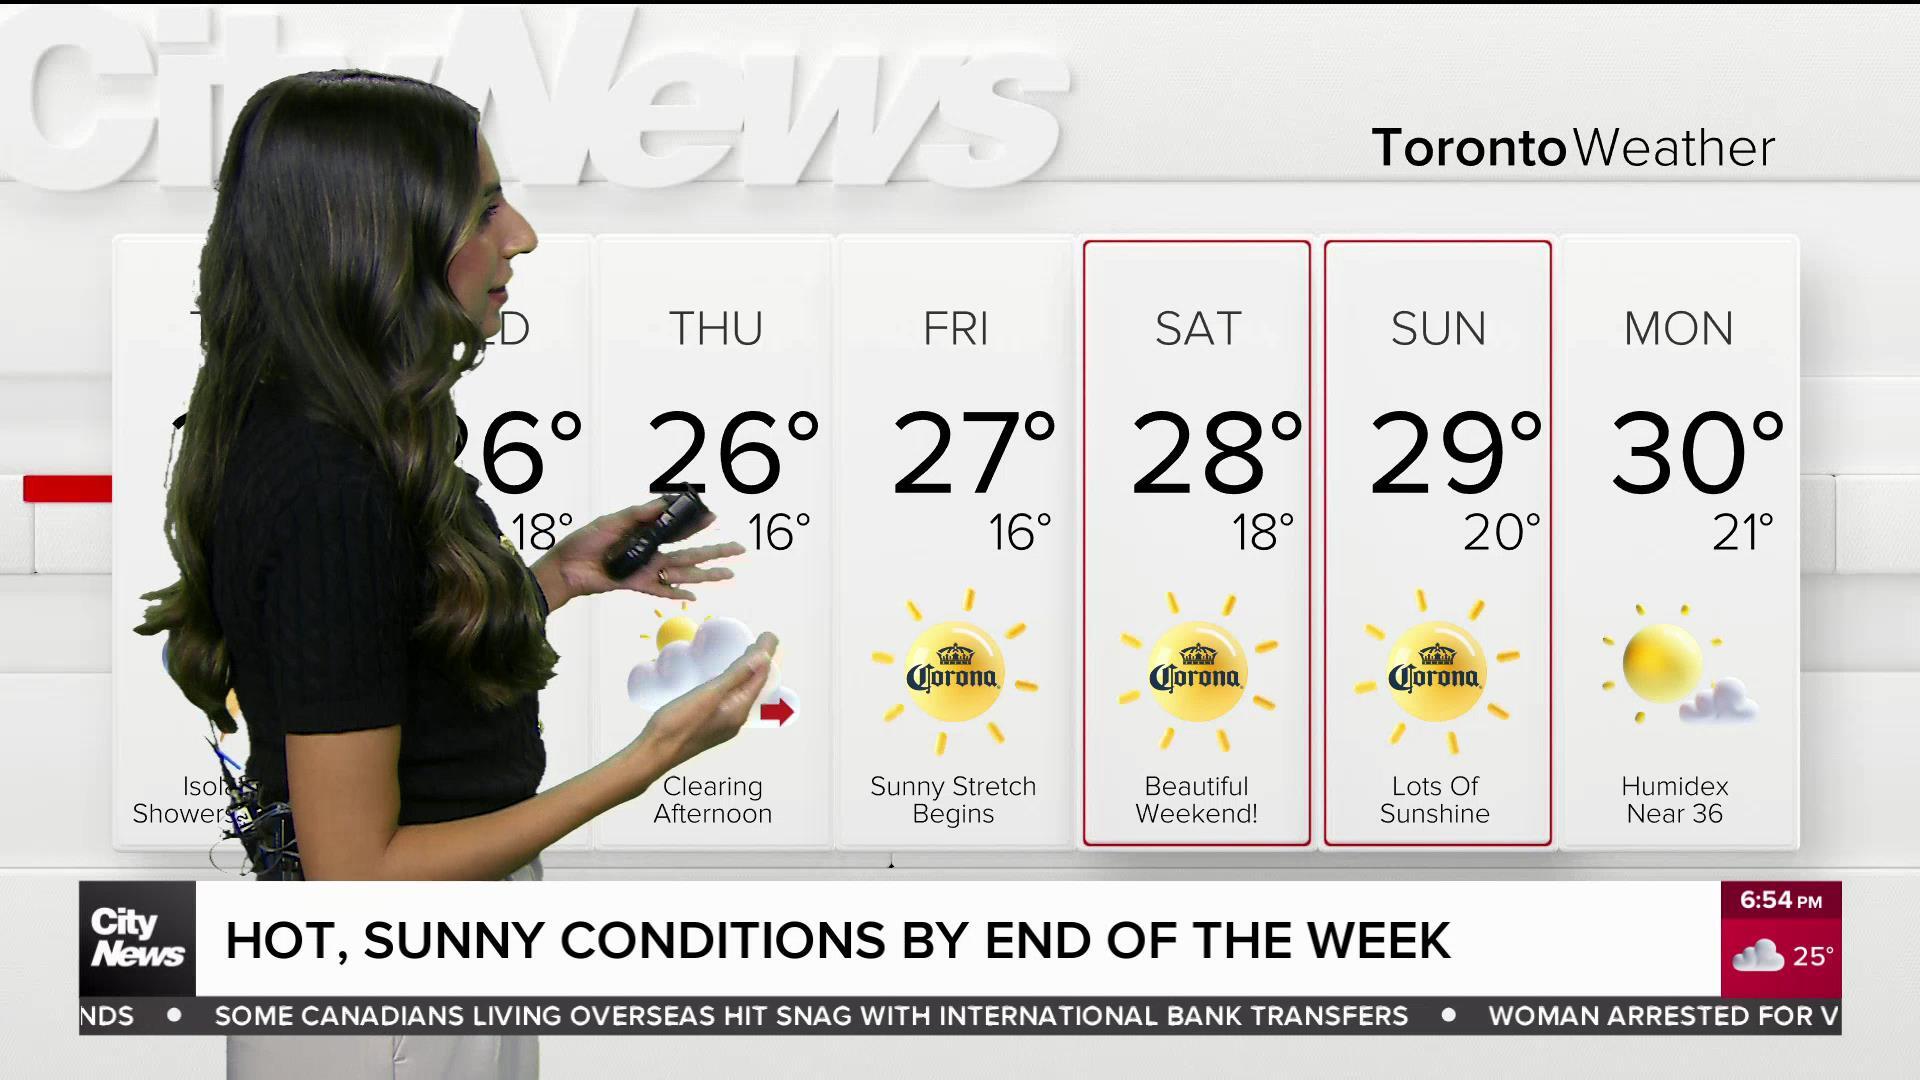 Hot, sunny conditions for the GTA by the end of the week